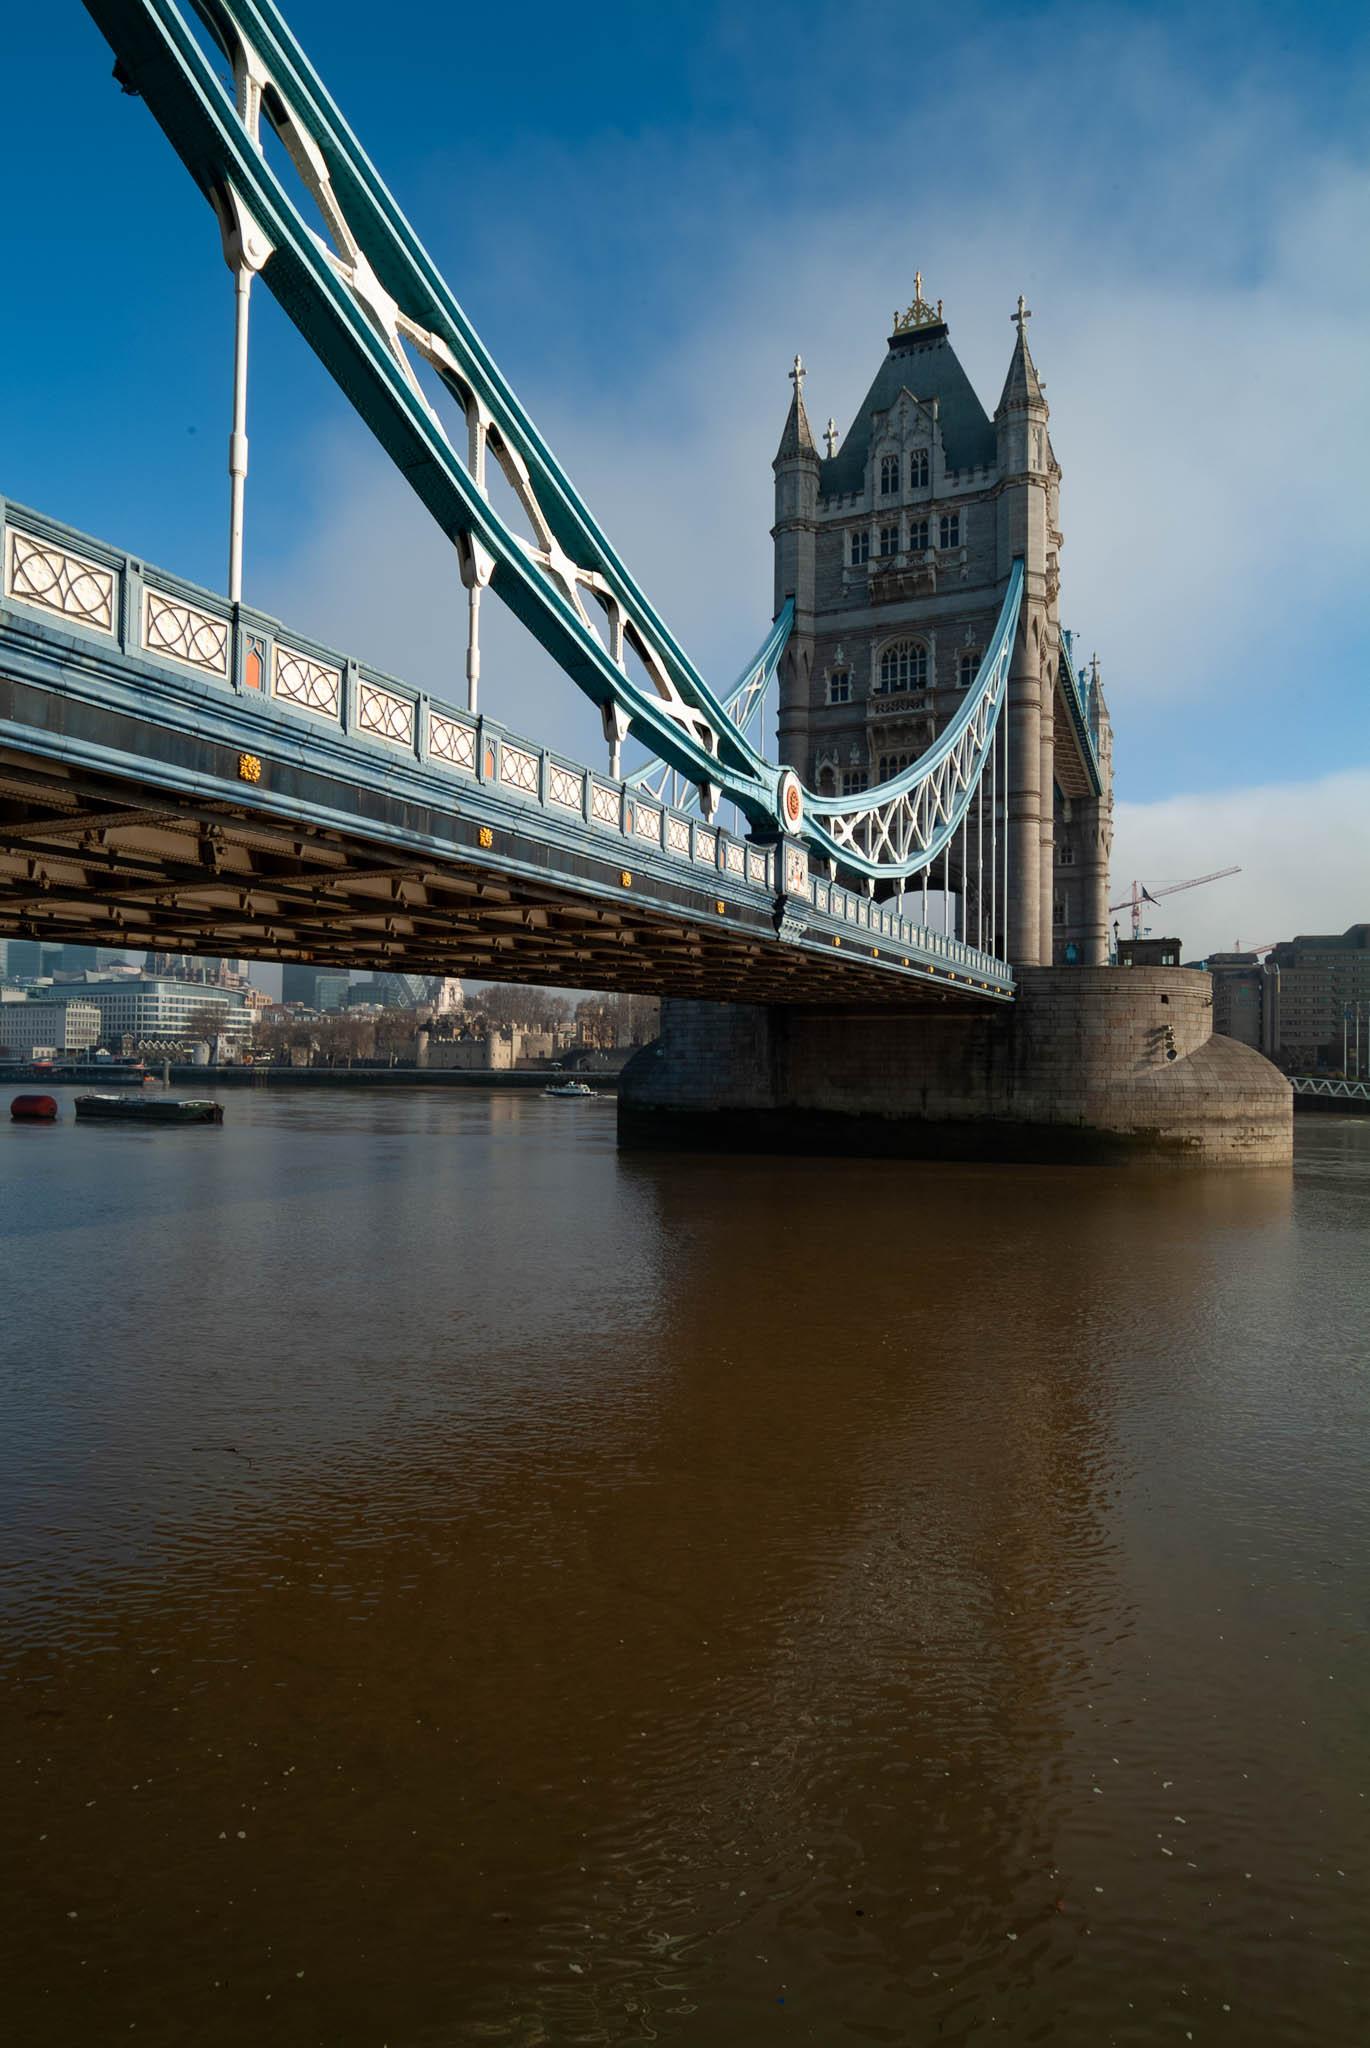 Portrait format photo of Tower bridge in the early 2000s